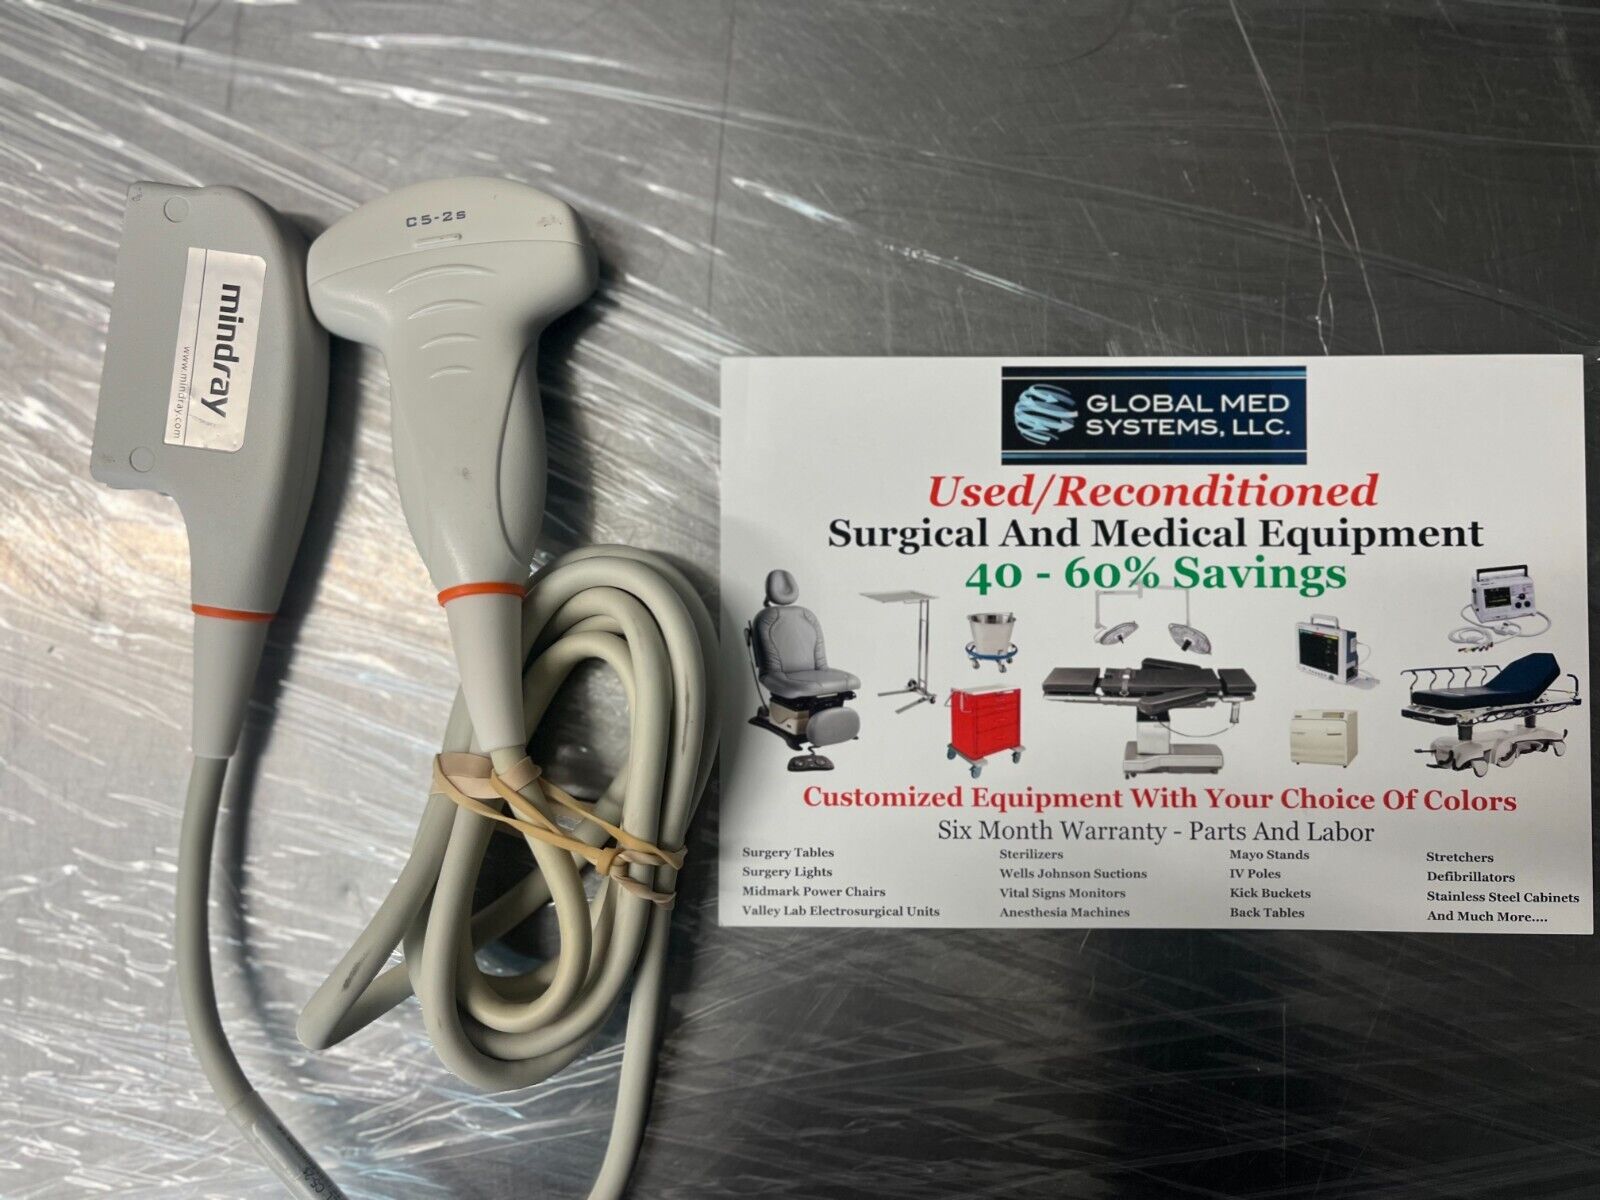 Mindray C5-2s Convex Transvaginal Ultrasound Probe Transducer - SOLD AS IS